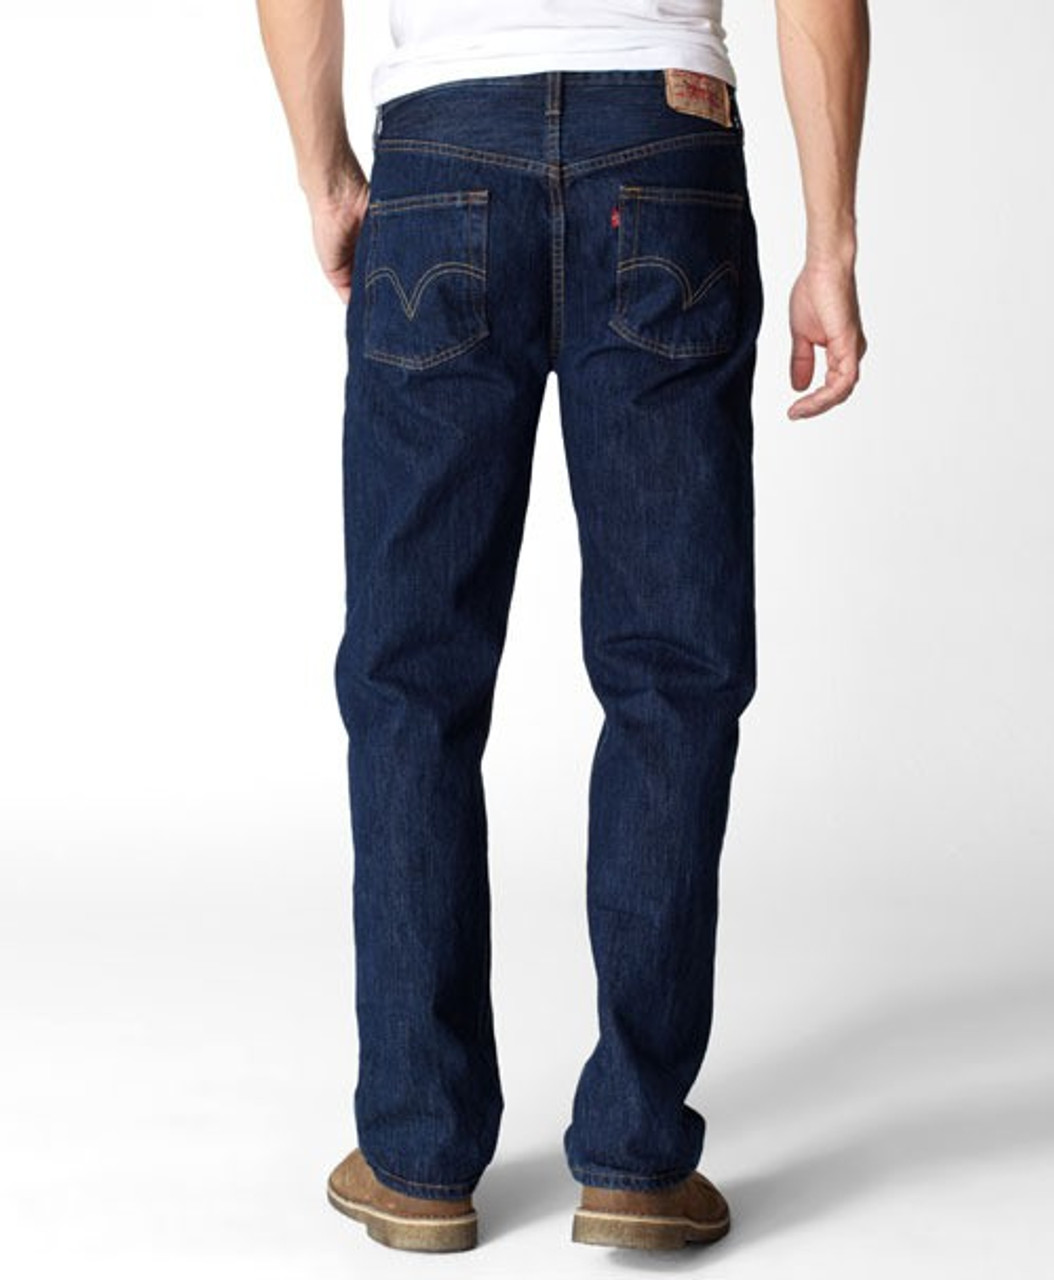 Purchase \u003e levis 36x29, Up to 72% OFF